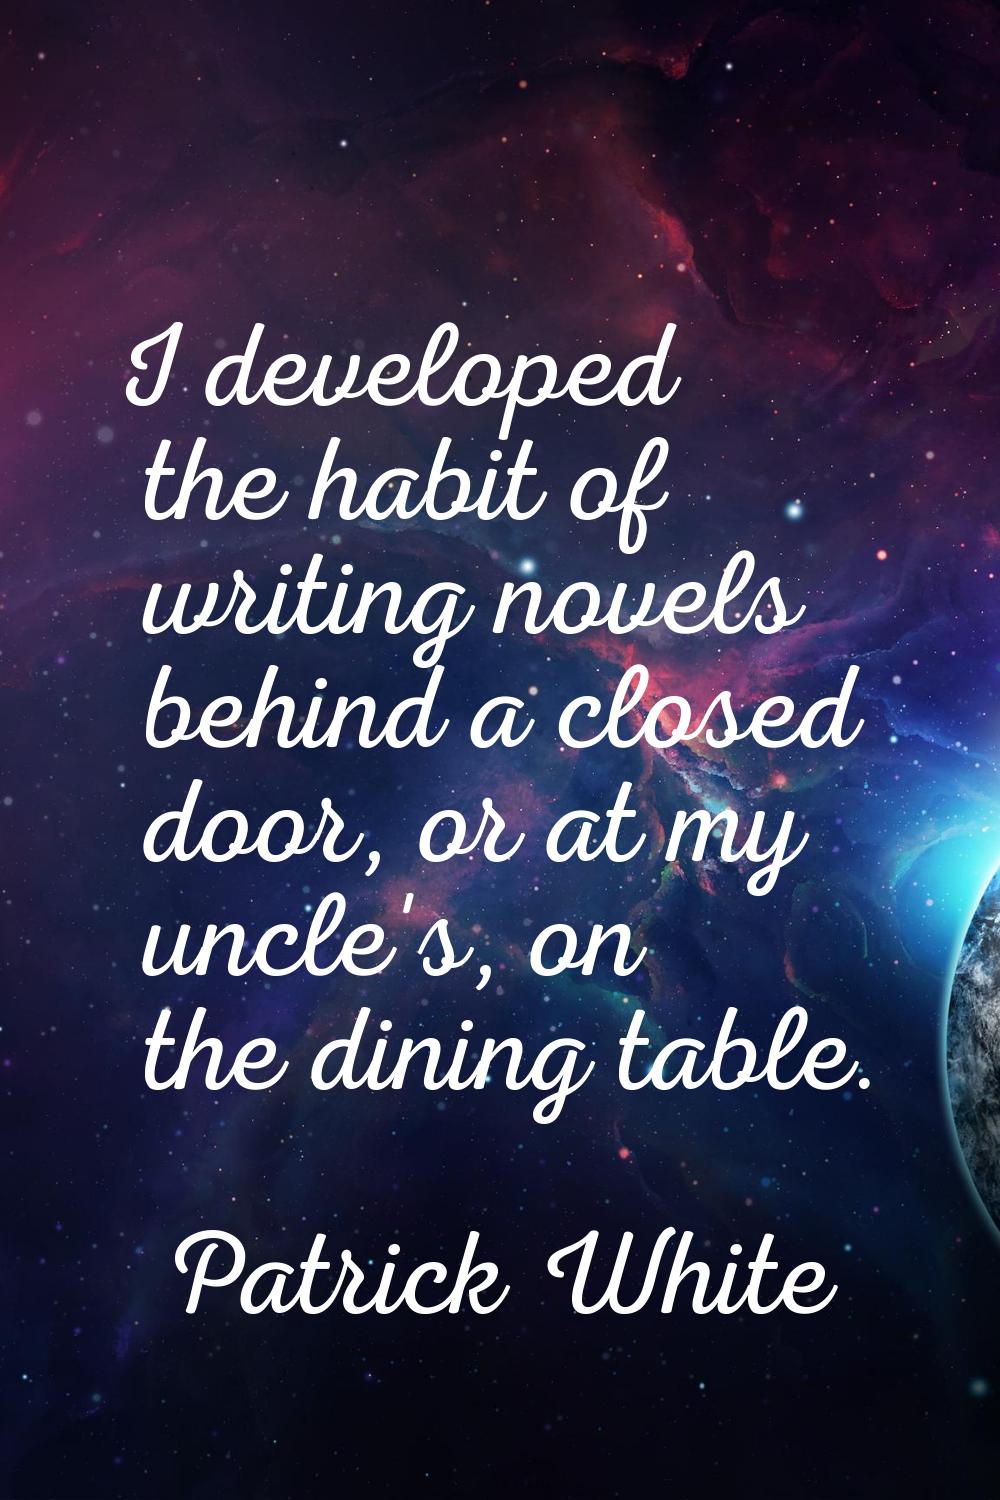 I developed the habit of writing novels behind a closed door, or at my uncle's, on the dining table